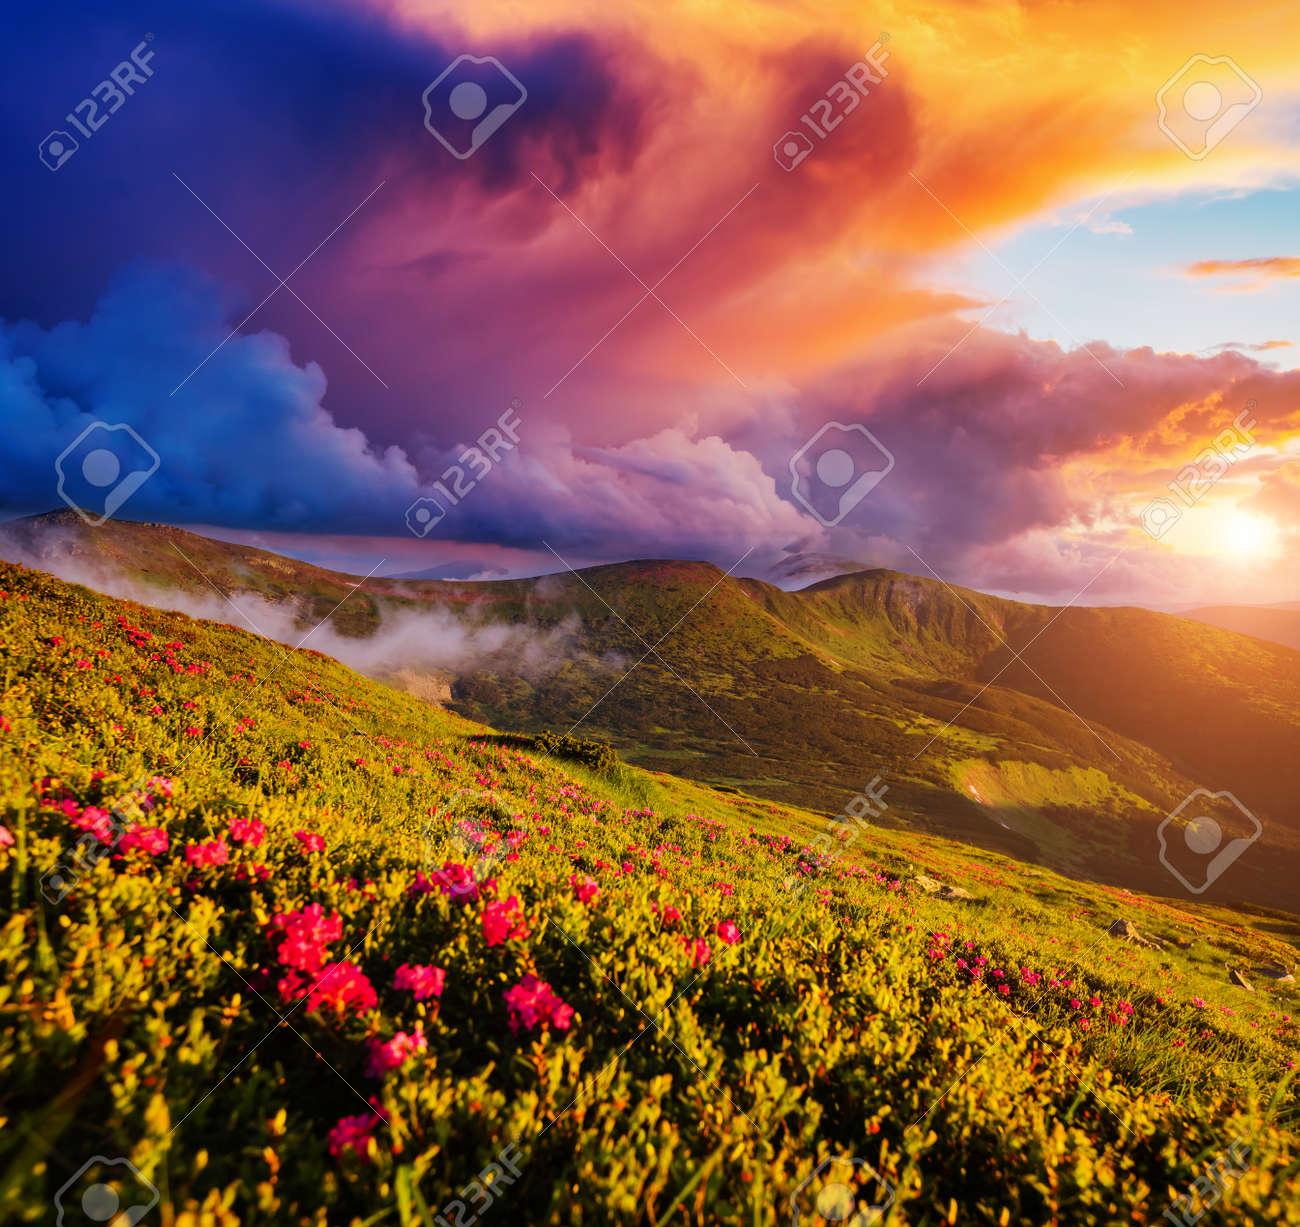 Unusual Summer Scene With Flowering Hills In The Evening Location